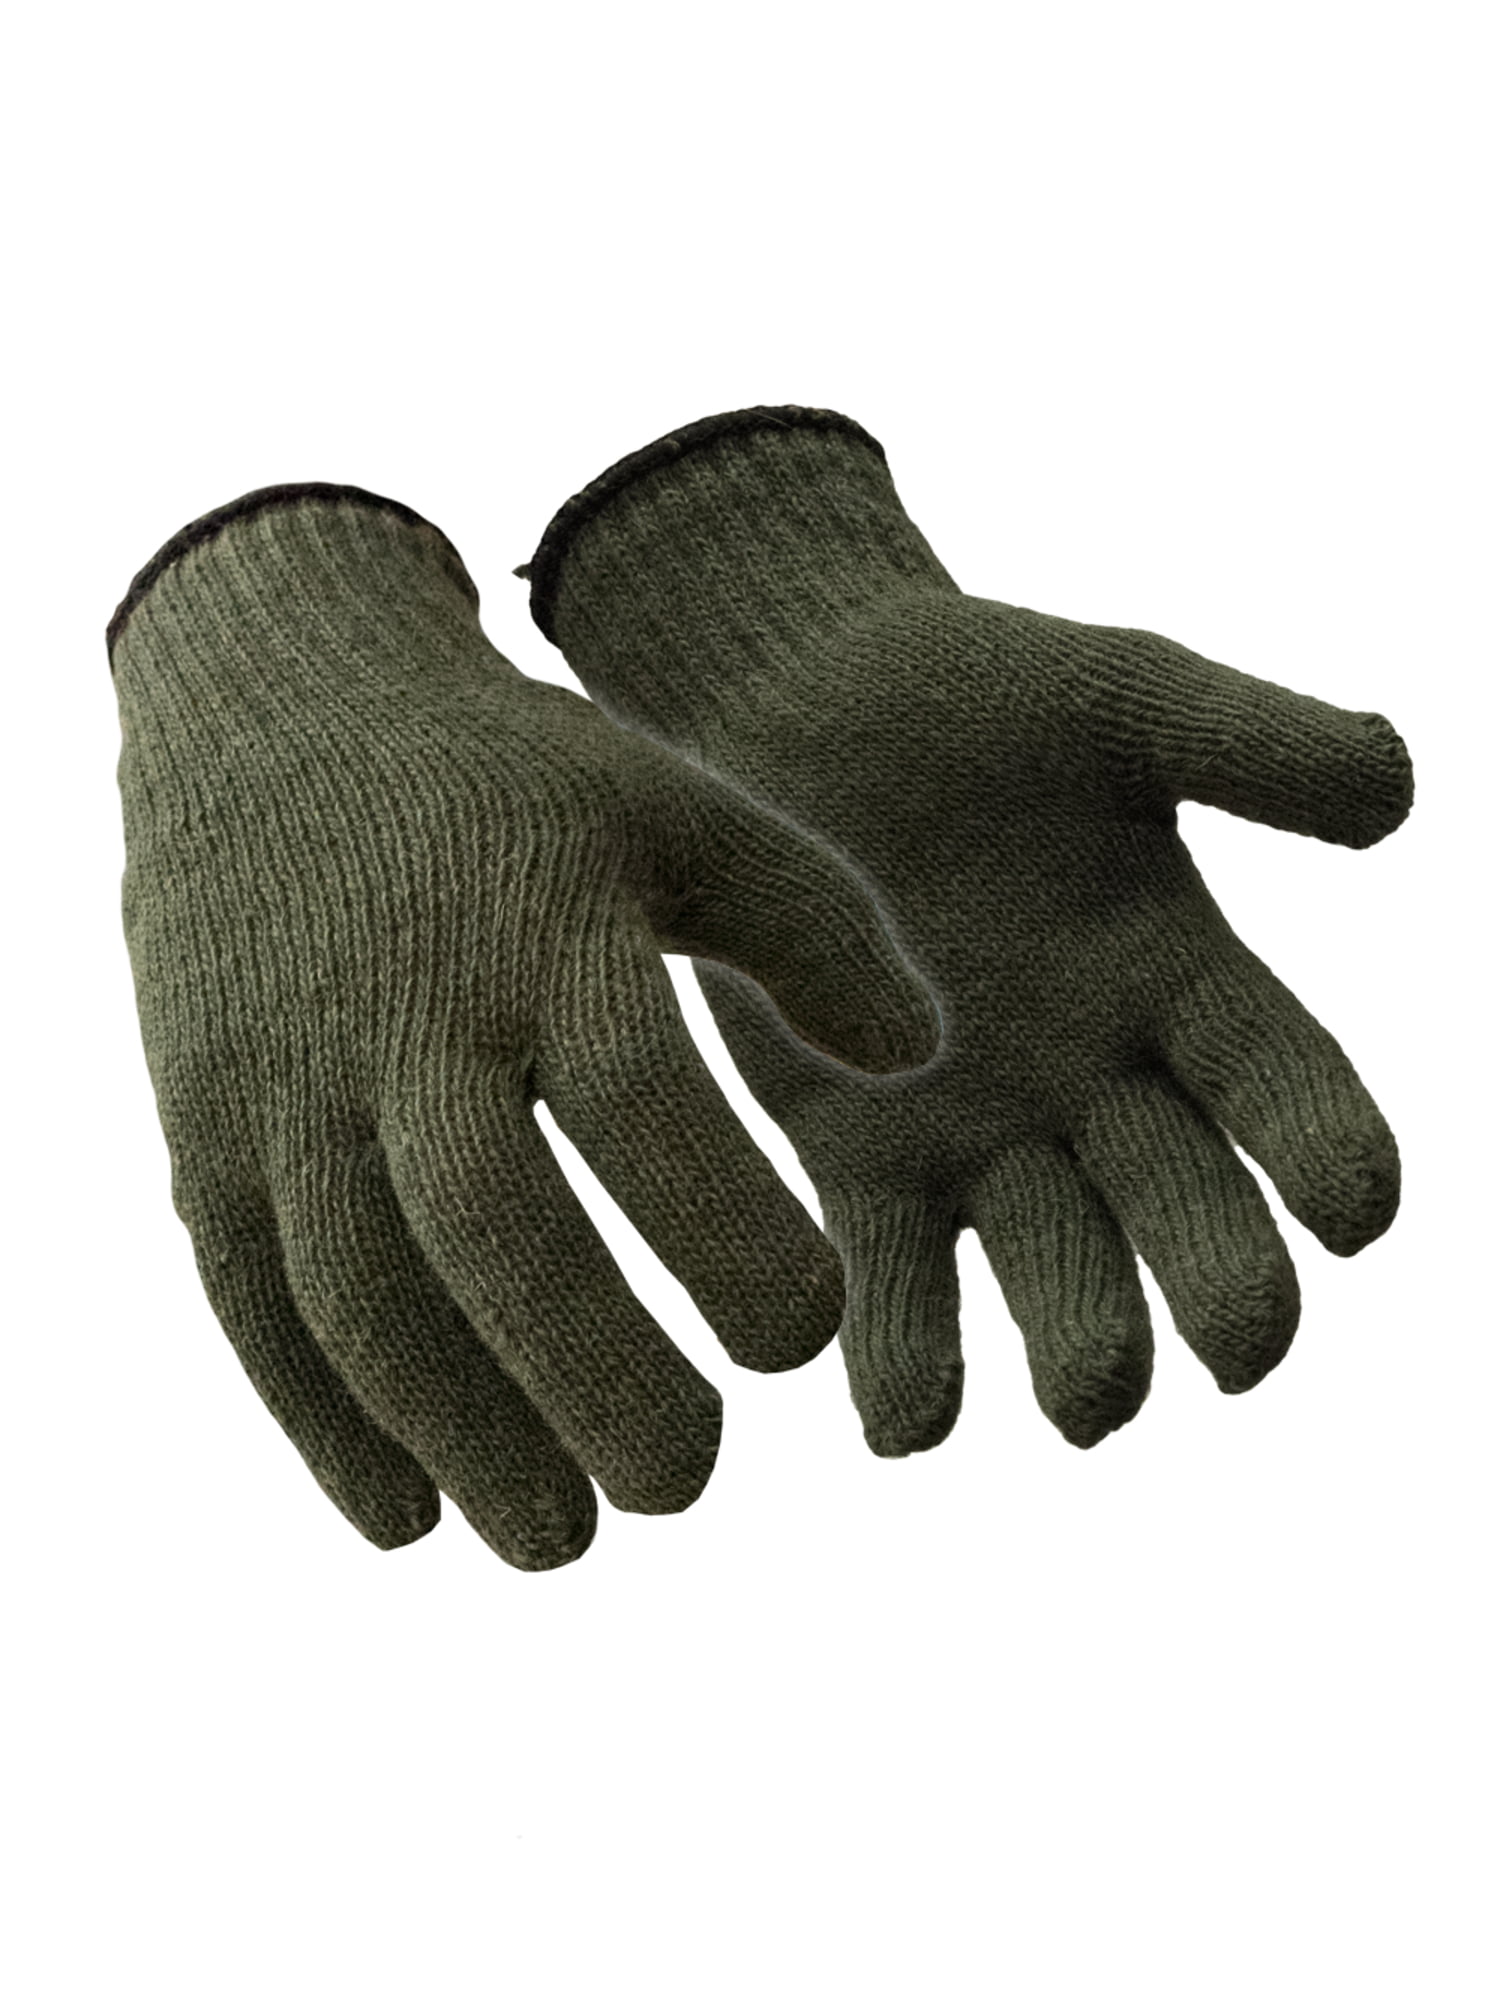 U.S MILITARY ISSUE D3A COLD WEATHER GLOVE LINERS 70% WOOL 30% NYLON SIZE 5 LARGE 